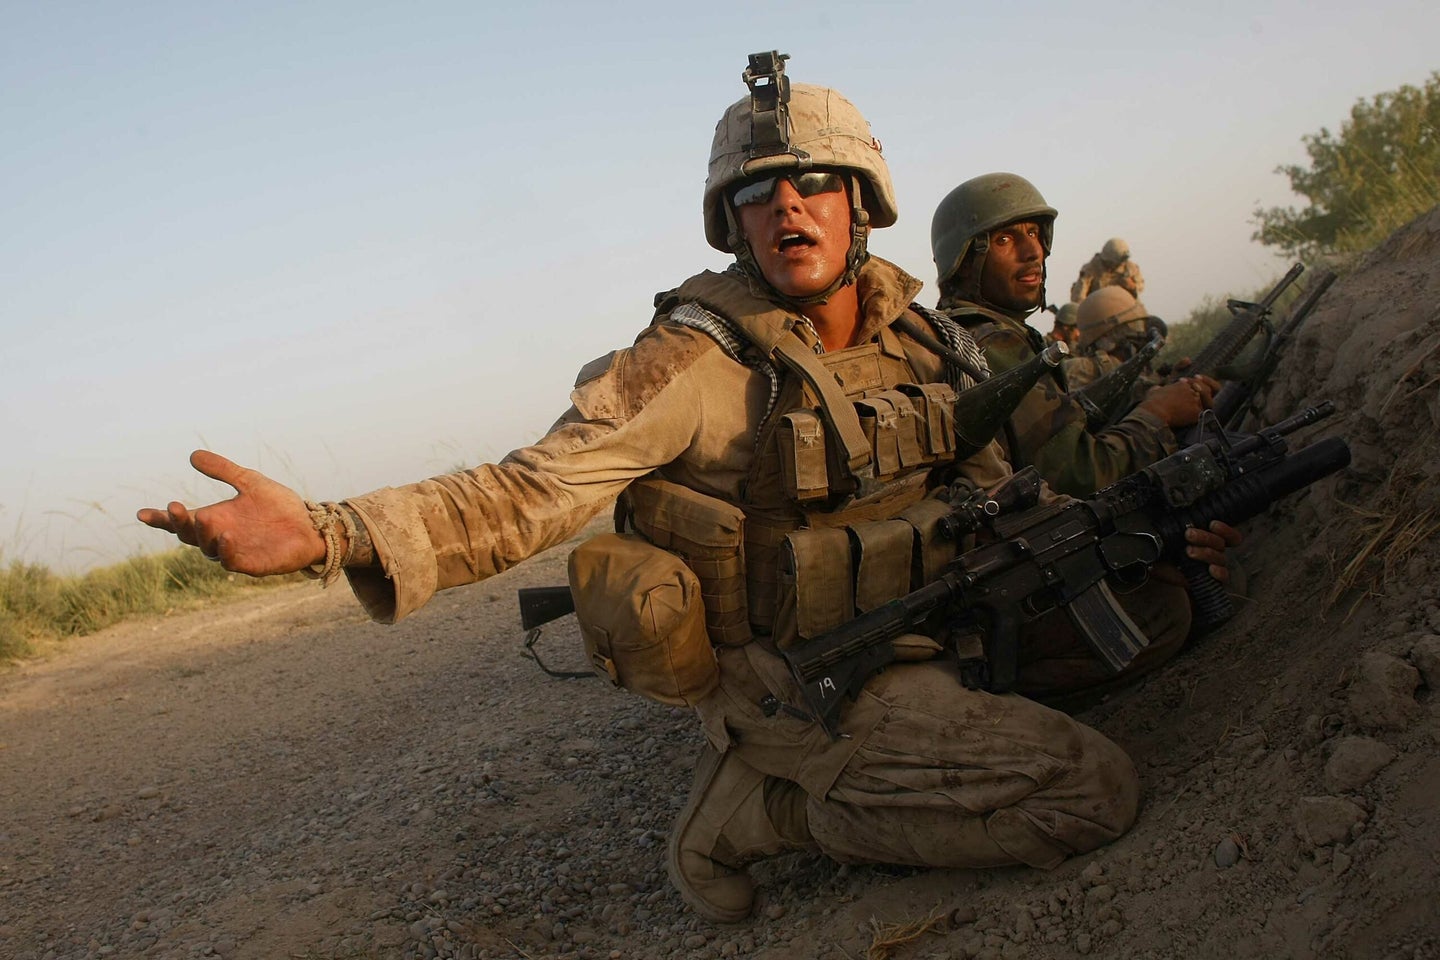 MIAN POSHTEH, AFGHANISTAN- JULY 17:  U.S. Marines with the 2nd Marine Expeditionary Brigade, RCT 2nd Battalion 8th Marines Echo Co. and an Afghan soldier take cover after taking enemy fire near where an IED was detonated on July 17, 2009 in Mian Poshteh, Afghanistan. The Marines are part of Operation Khanjari which was launched to take areas in the Southern Helmand Province that Taliban fighters are using as a resupply route and to help the local Afghan population prepare for the upcoming presidential elections.  (Photo by Joe Raedle/Getty Images)